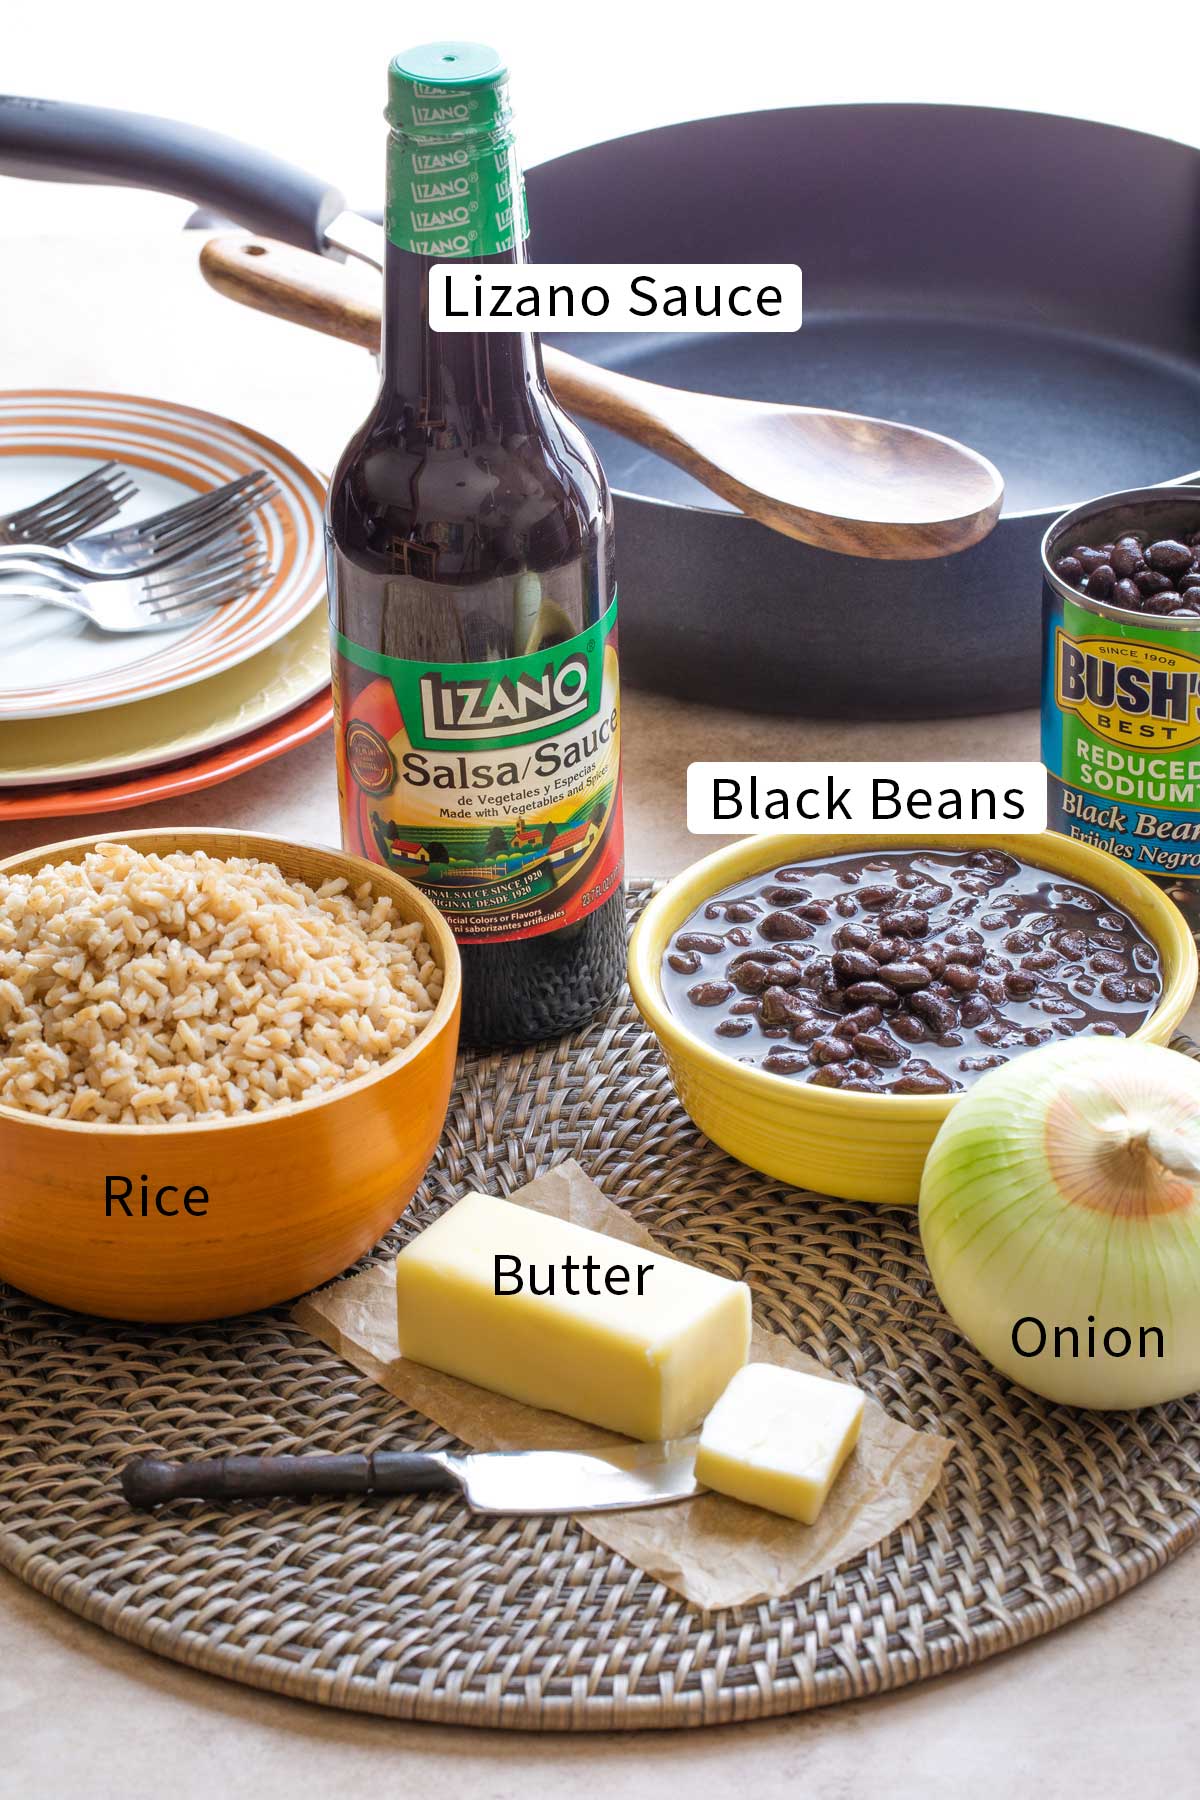 Labeled photo of recipe ingredients with text overlays "Lizano Sauce", "Rice", "Black Beans", "Butter" and "Onion".